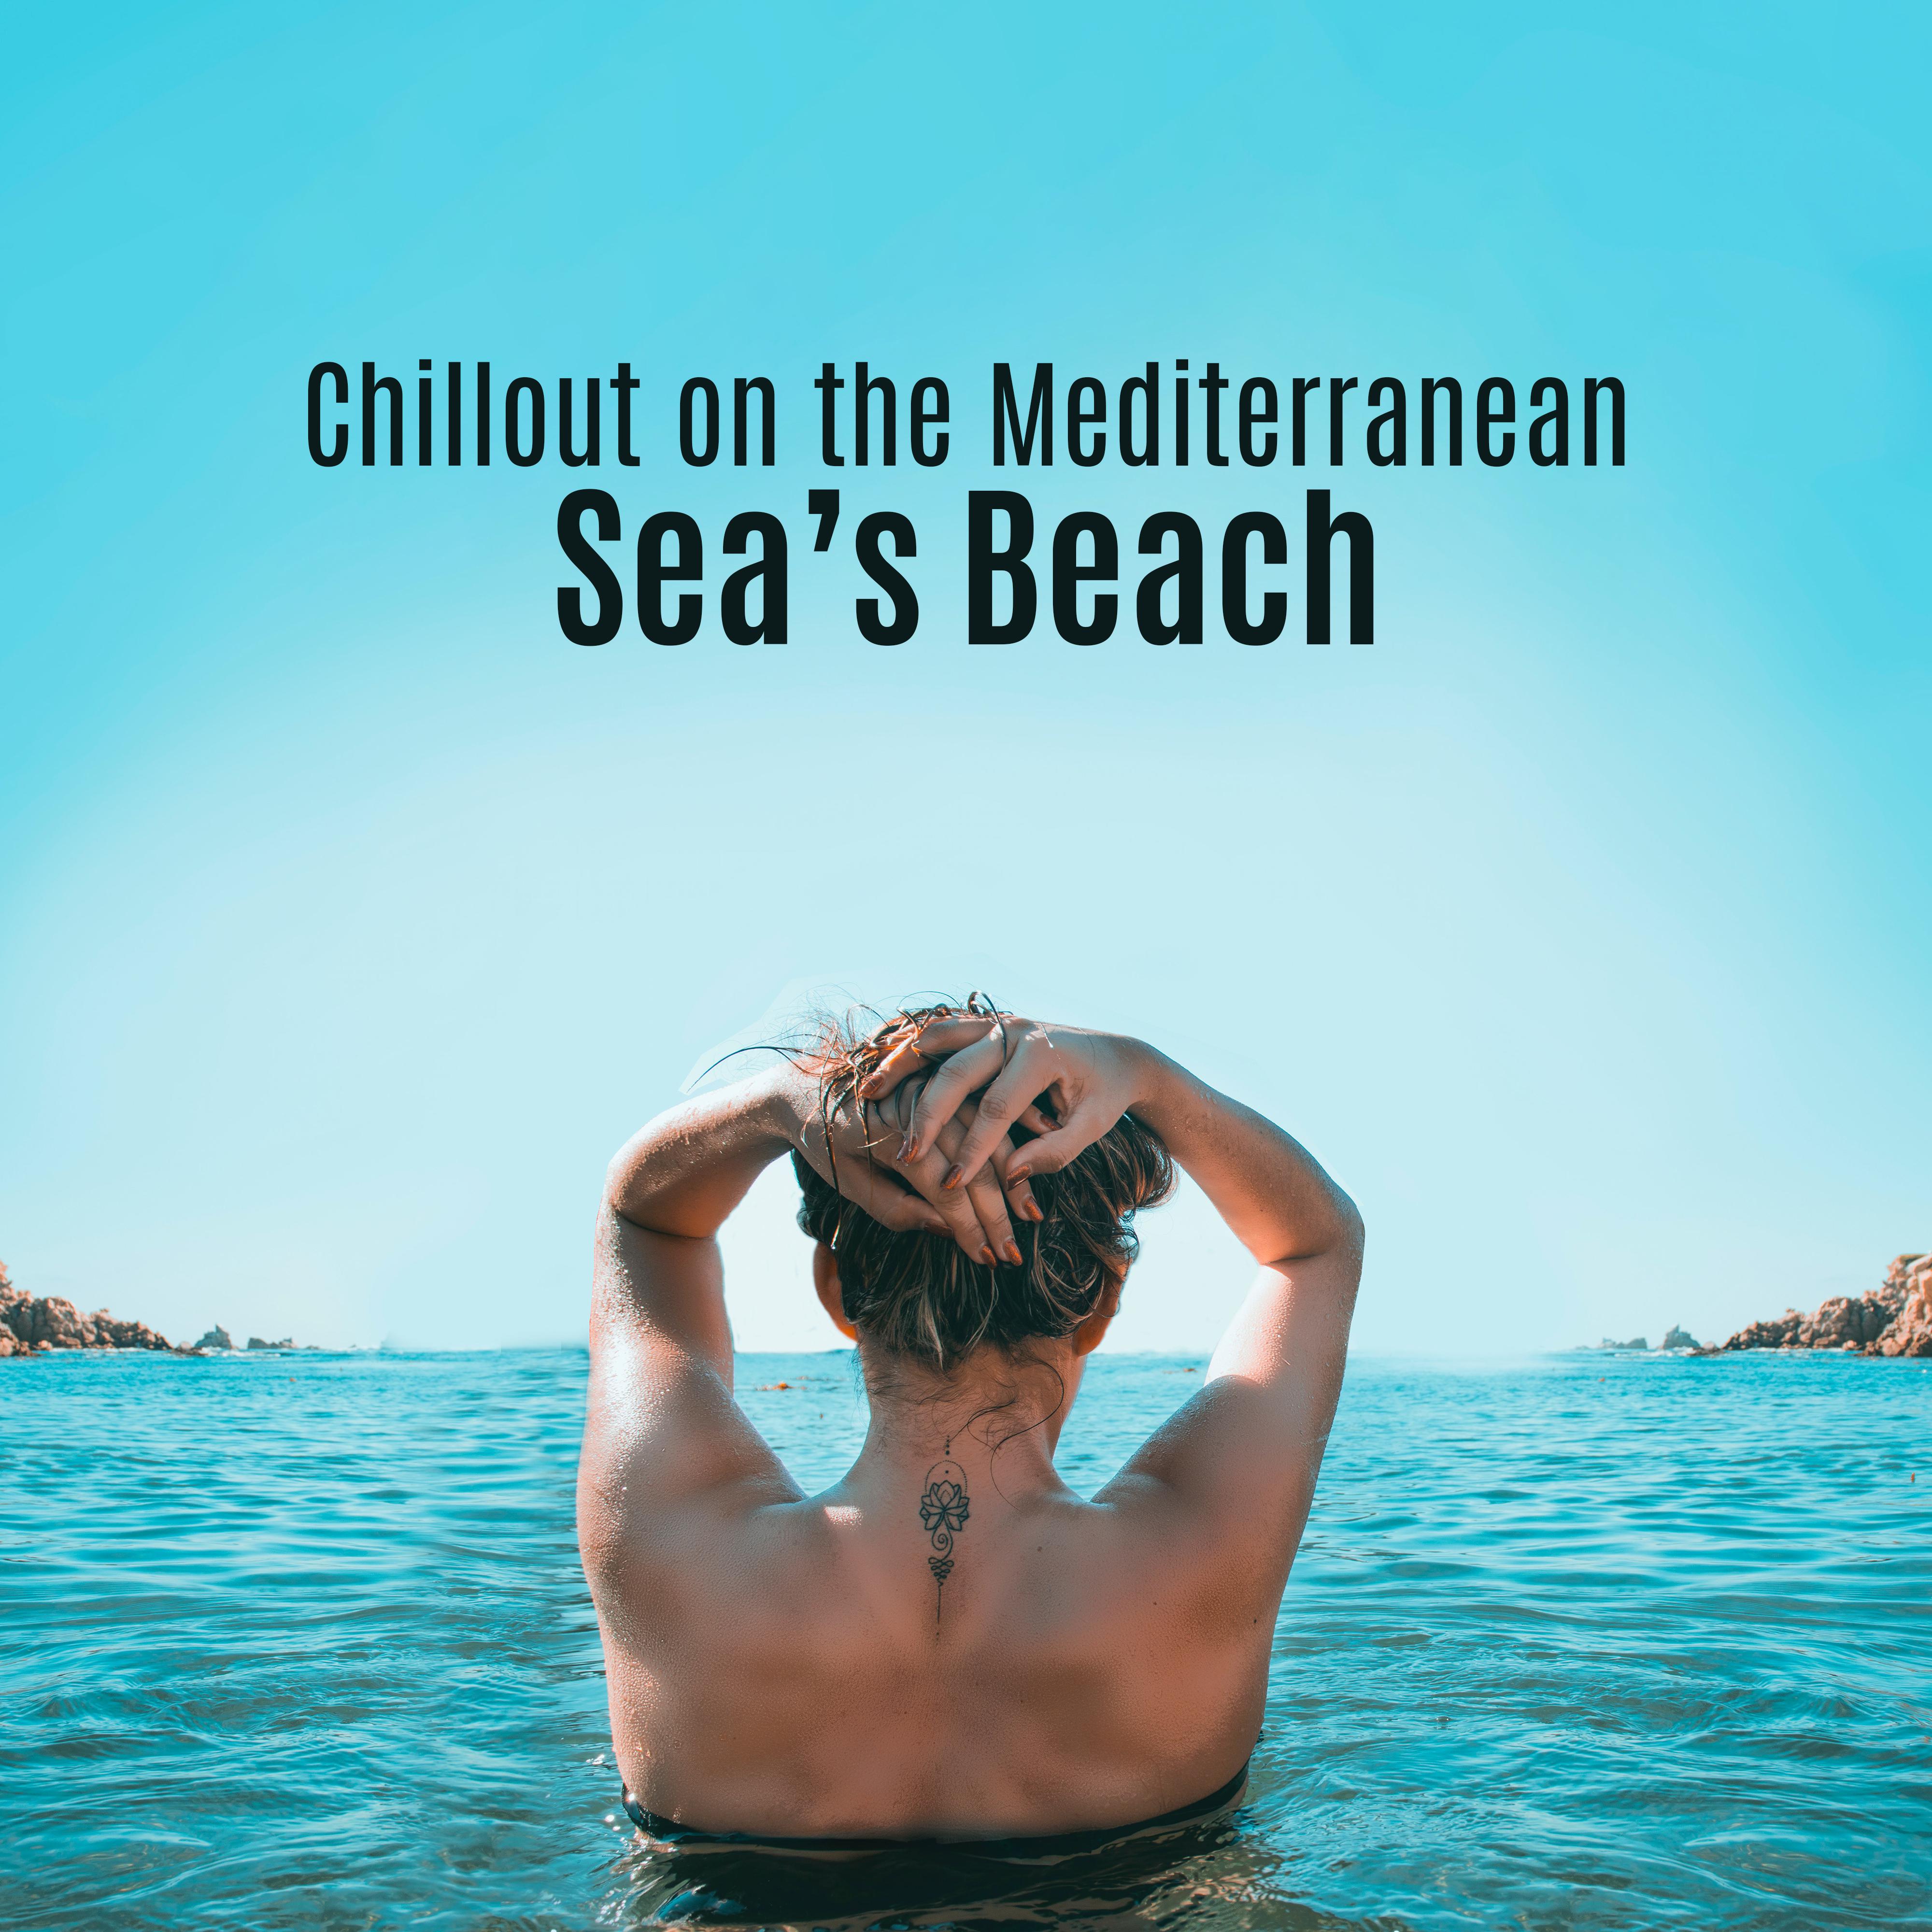 Chillout on the Mediterranean Sea’s Beach: 2019 Total Relaxing Chill Out Music Selection, Celebrate Your Summer Vacation, Tropical Holiday Anthems, Sunbathing Vibes, Happy Beats & Melodies